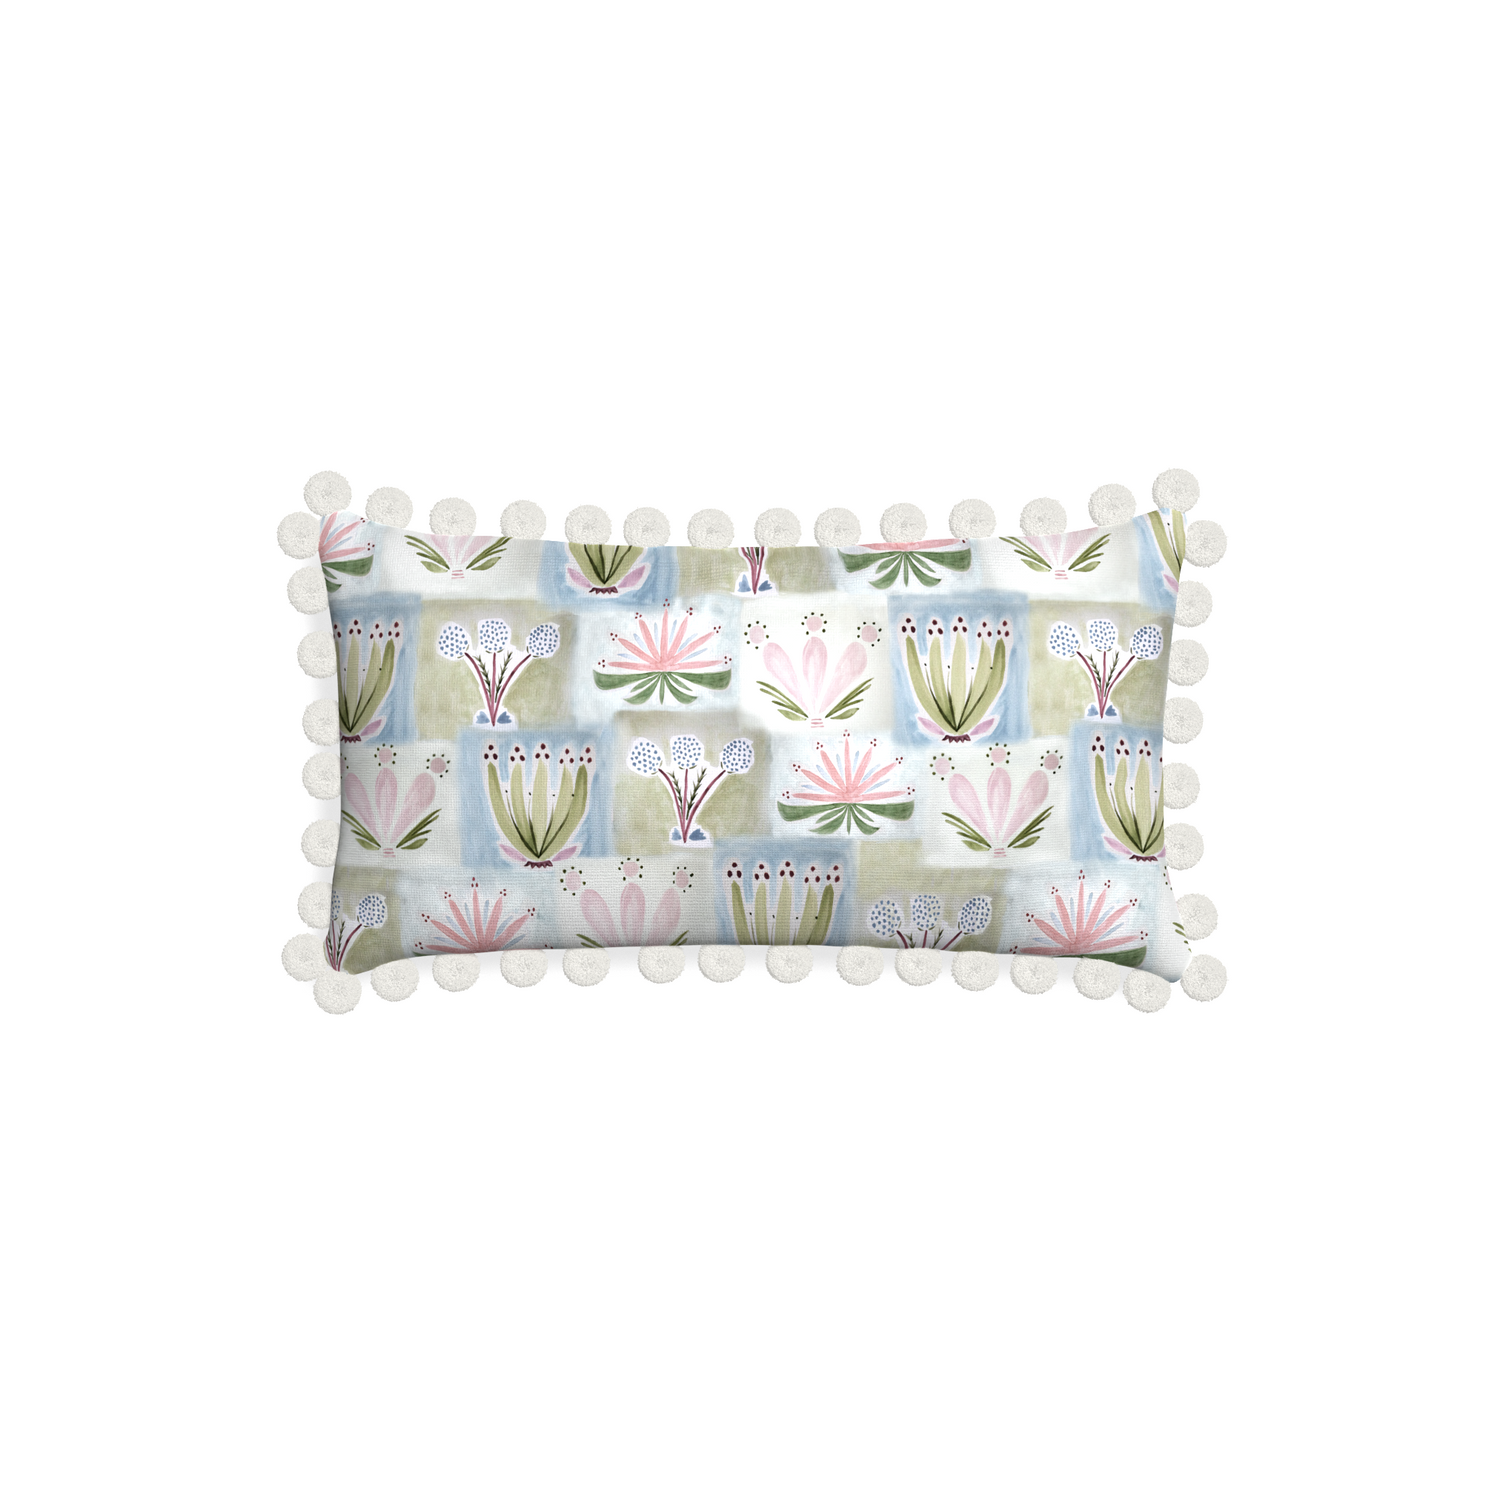 Petite-lumbar harper custom hand-painted floralpillow with snow pom pom on white background